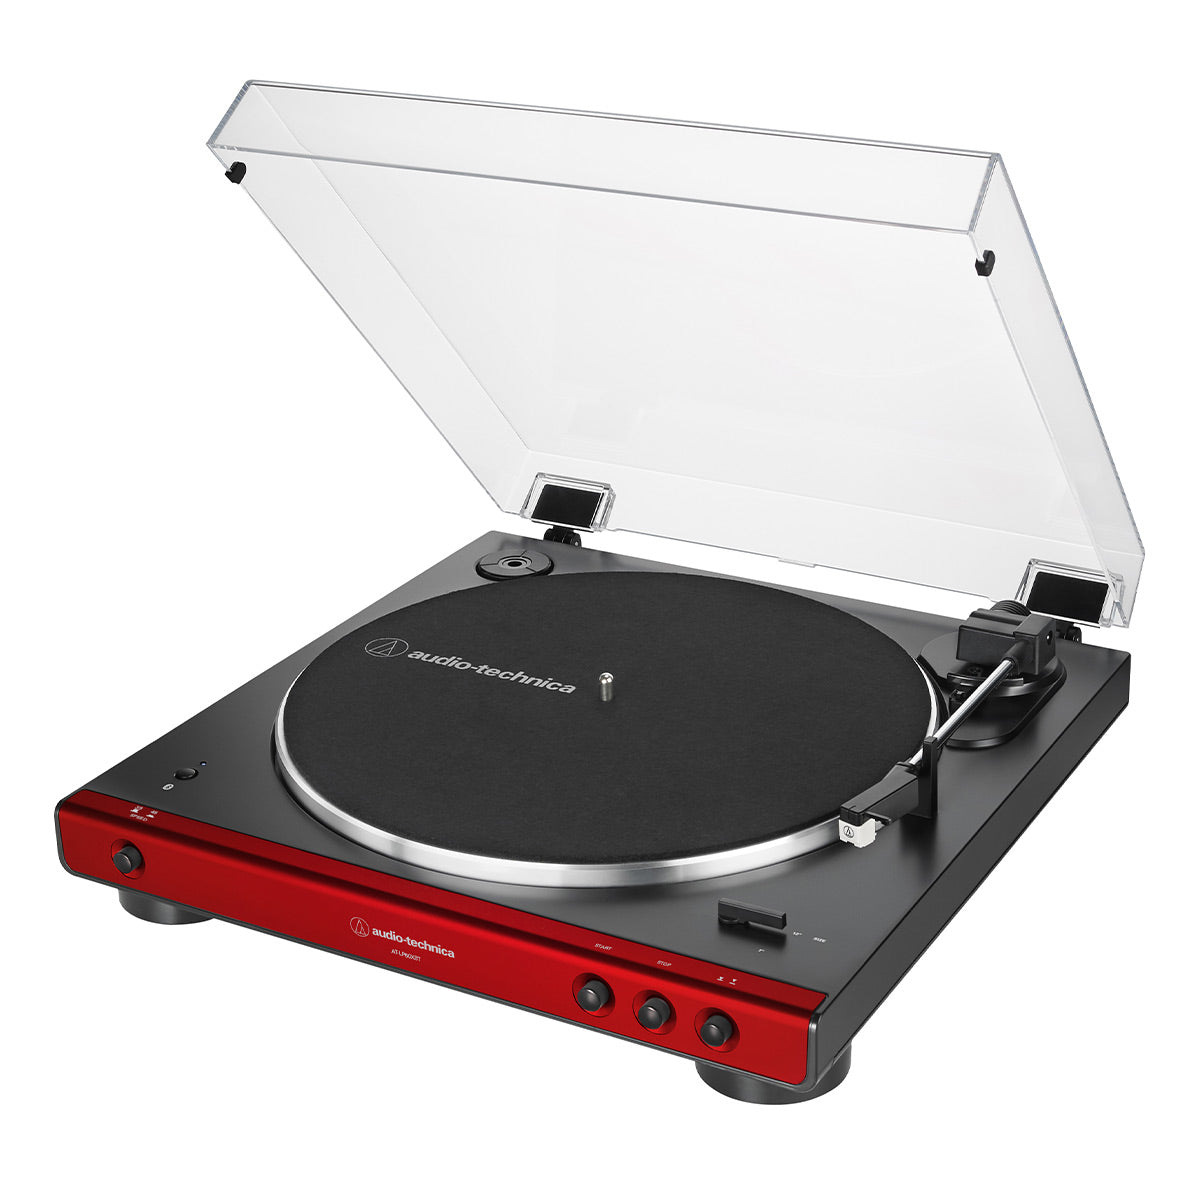 No USB port on Sony PS-LX310BT? : r/turntables